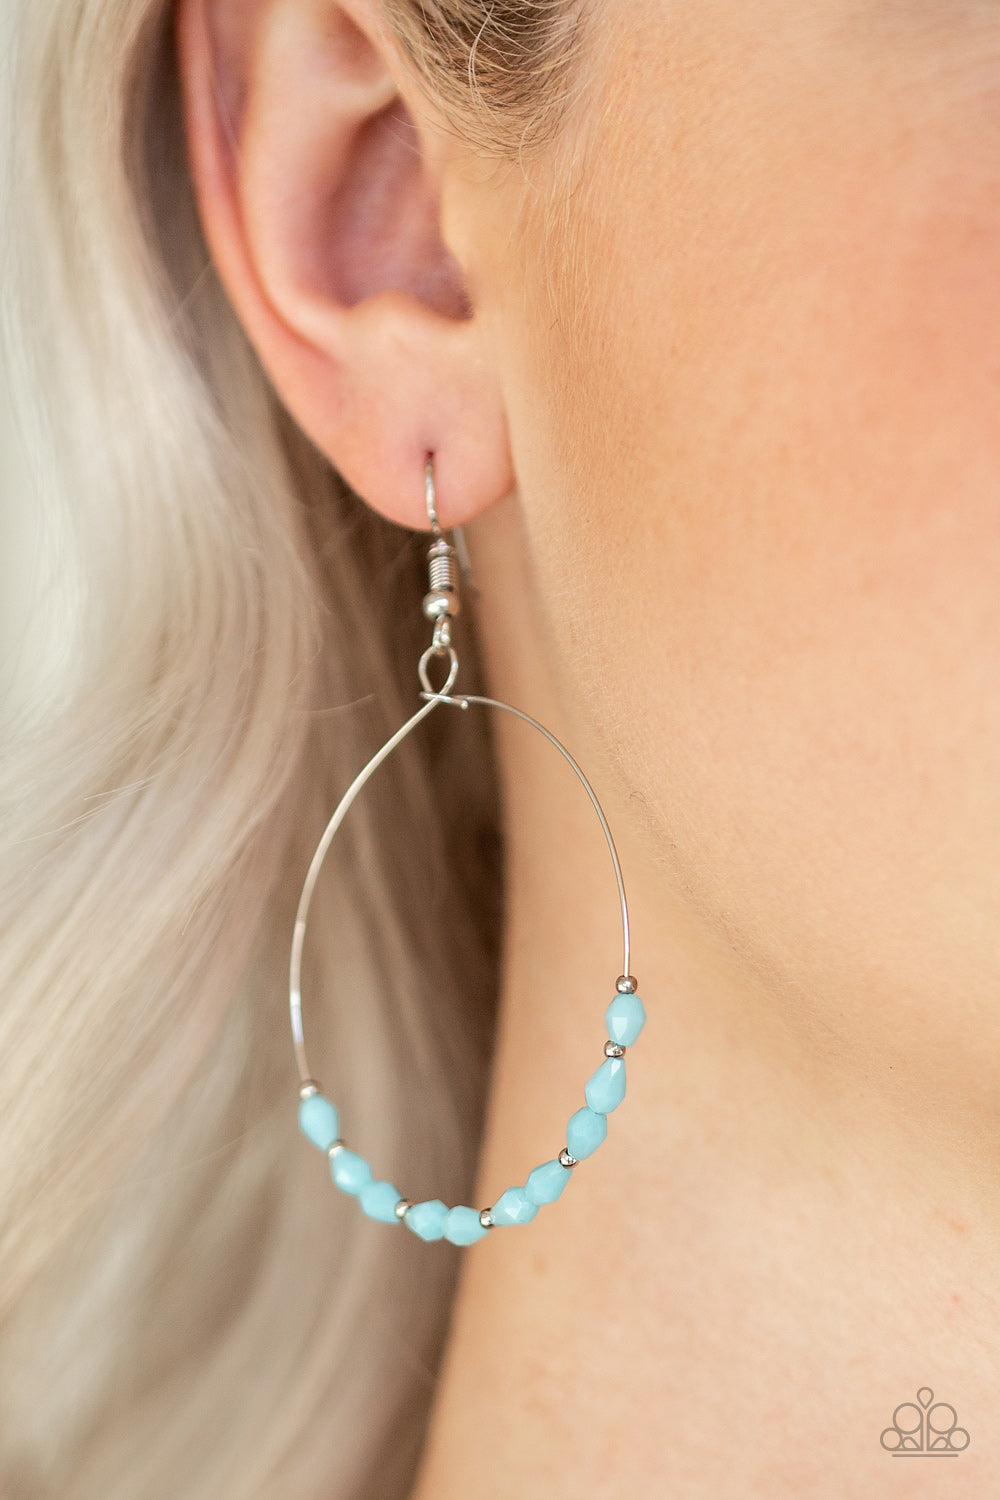 Prize Winning Sparkle Blue Earring Paparazzi Accessories